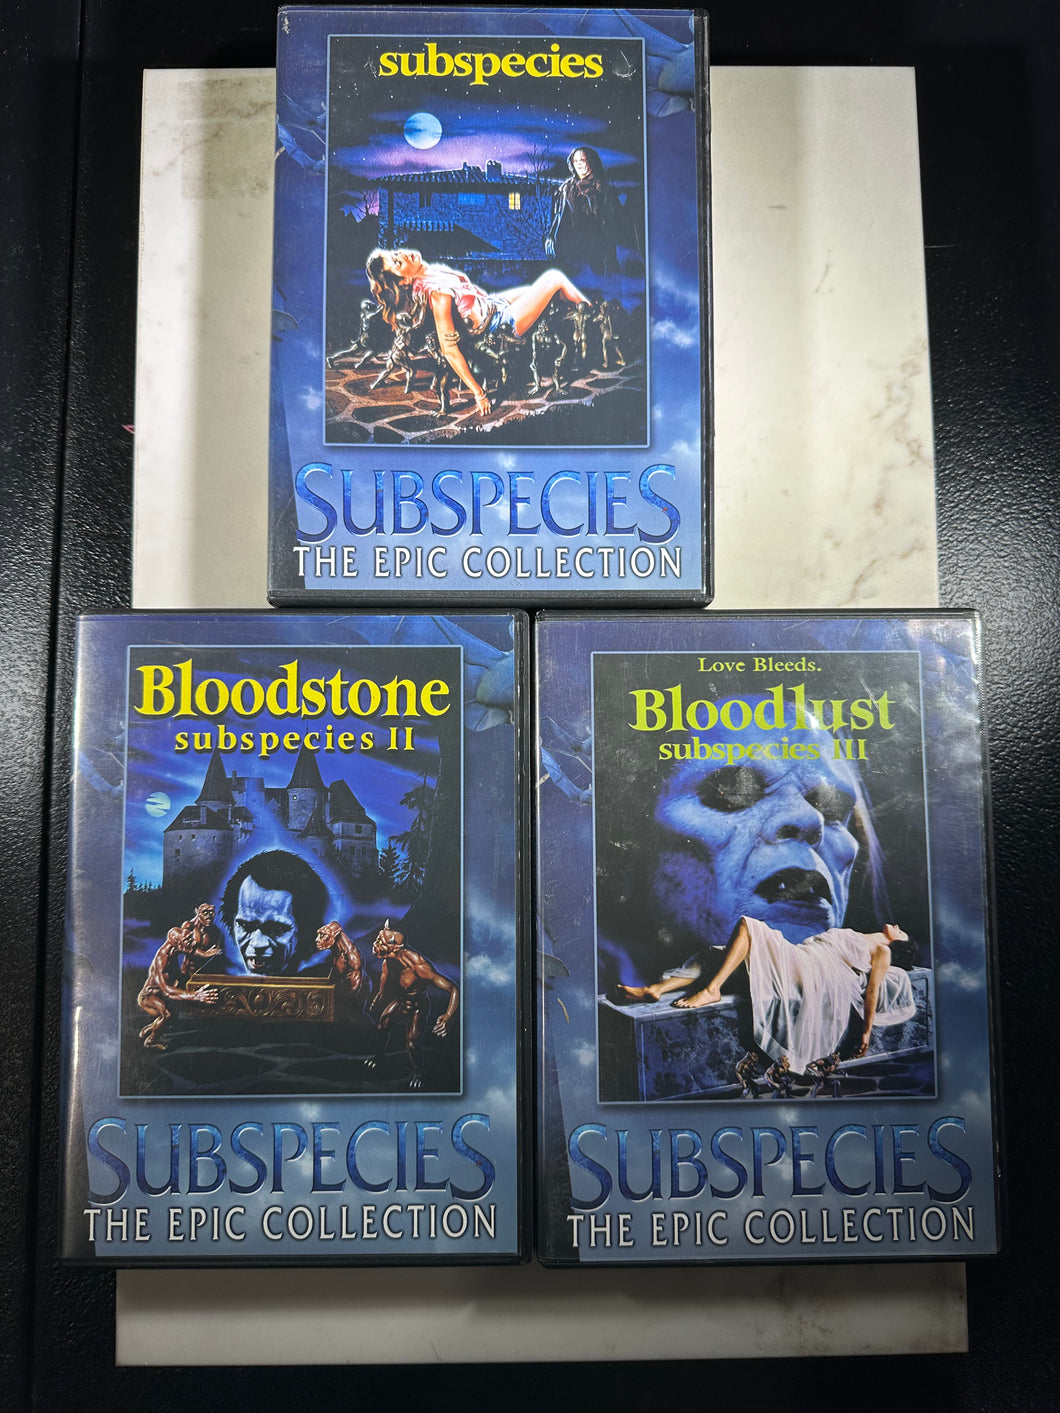 FULL MOON FEATURES SUBSPECIES THE EPIC COLLECTION 1-3 3 DISC DVD SET PREOWNED